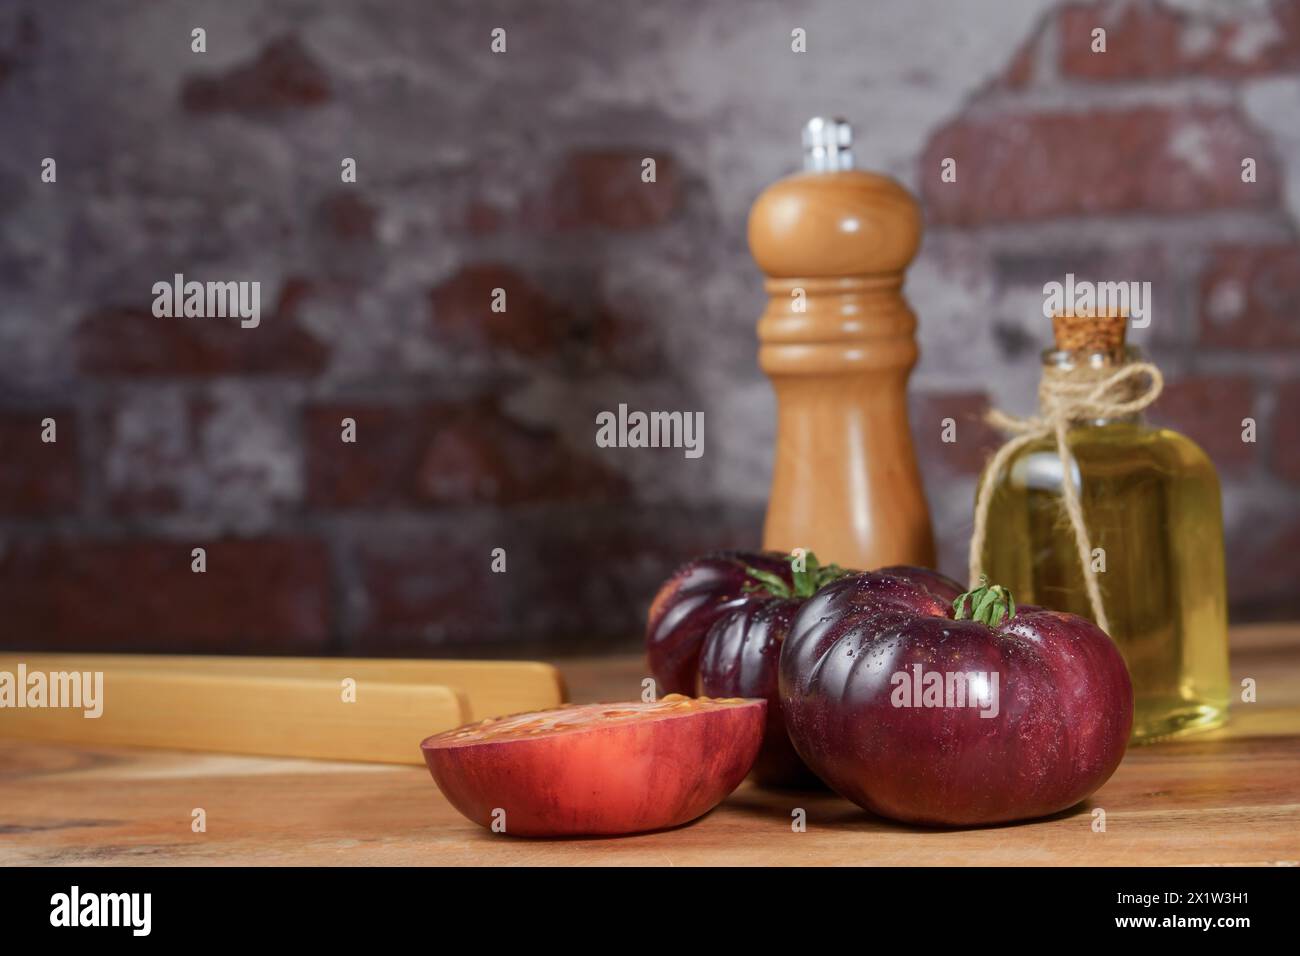 Group of tasty fresh tomatoes of the blue variety together with wooden tongs, a glass bottle of olive oil and a pepper shaker on a wooden table Stock Photo